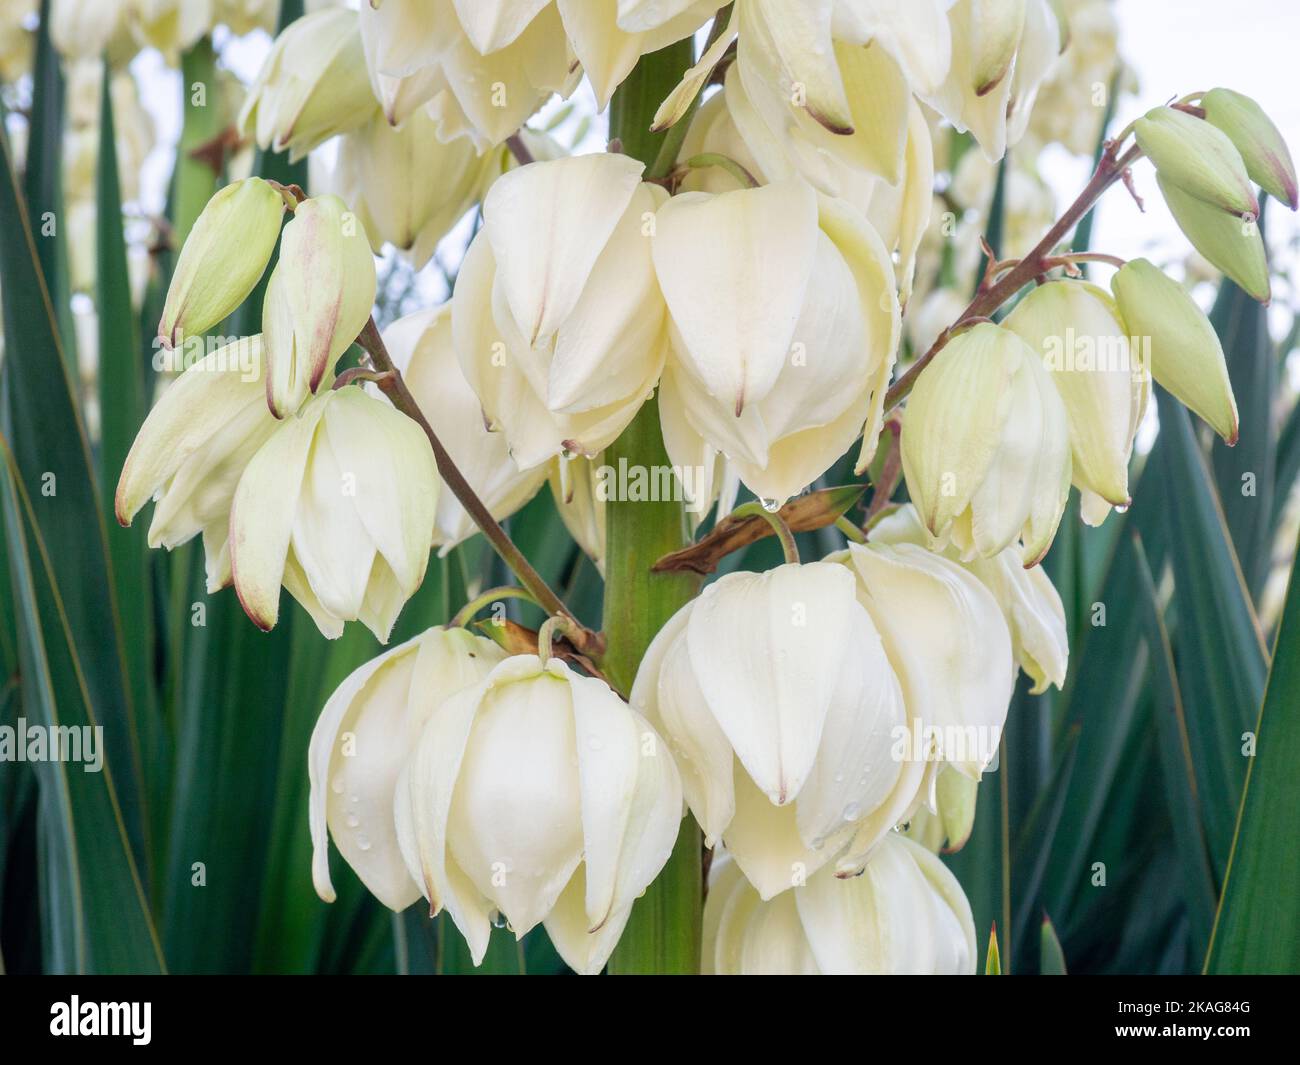 Yucca. The palm tree blooms with white flowers. Botany. Flowers close-up. Stock Photo